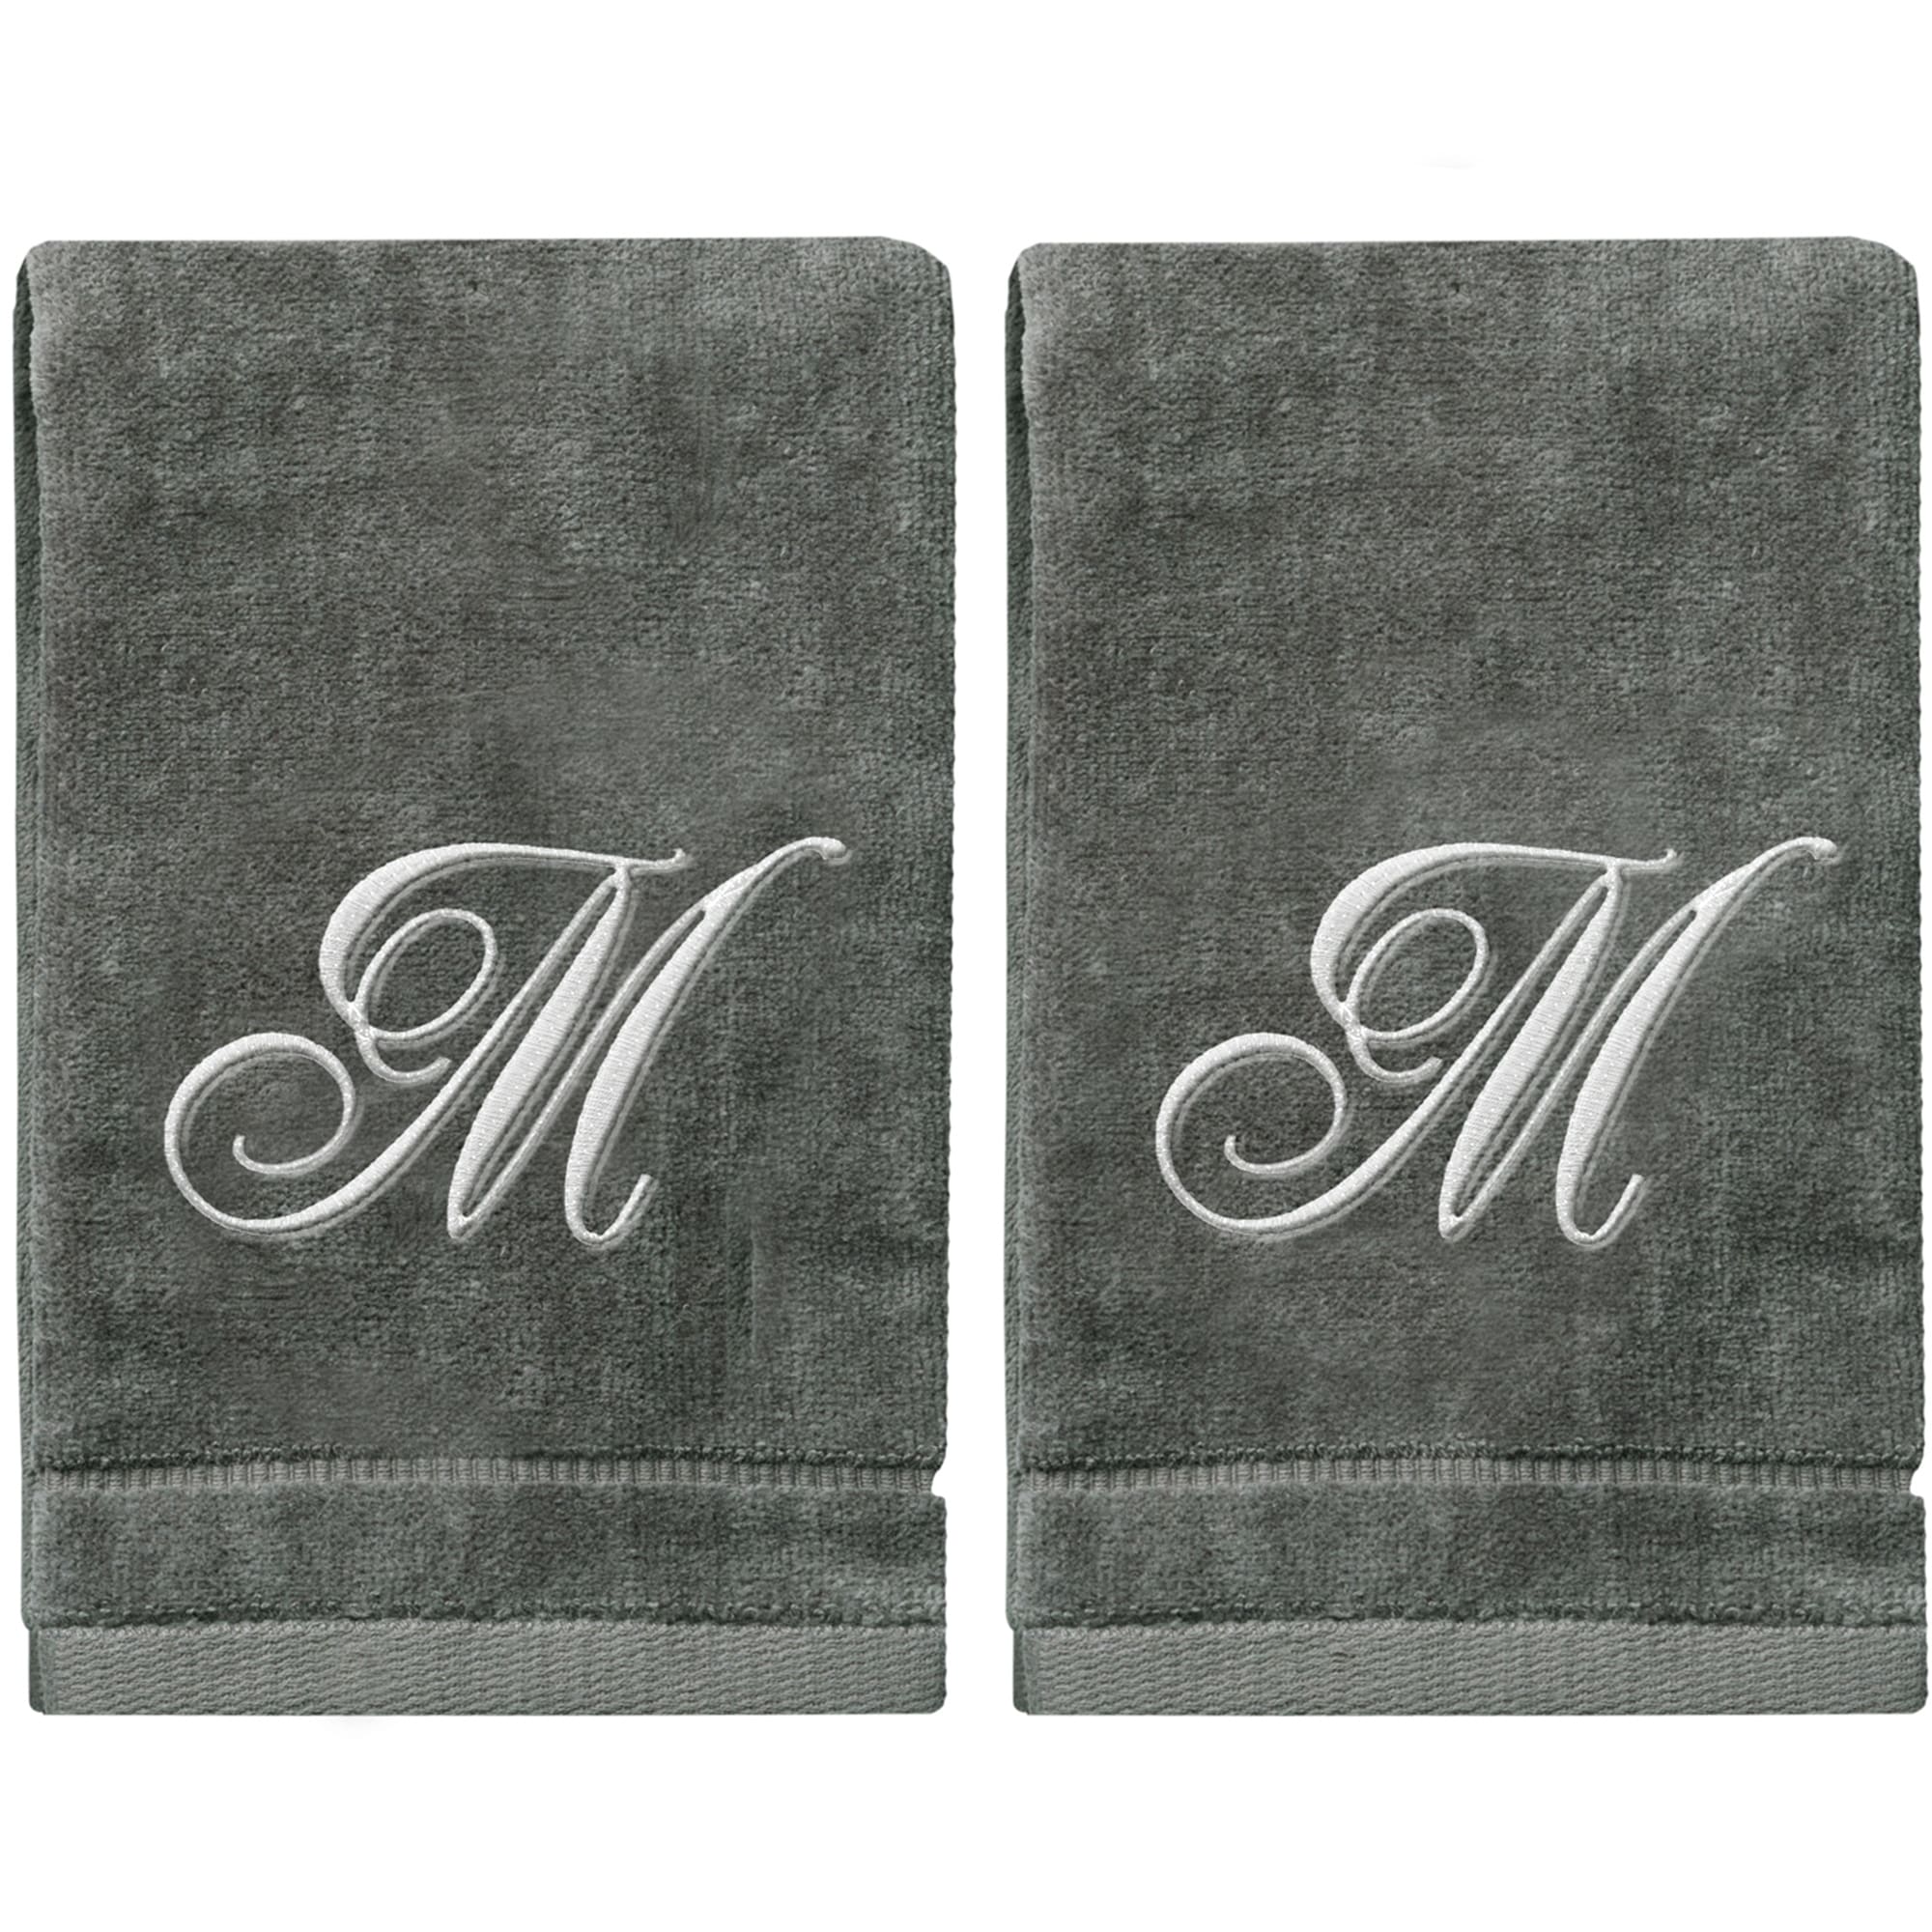 https://ak1.ostkcdn.com/images/products/is/images/direct/7152943cf8445e390d82671fe46a007c84899308/Soft-Velour-Silver-Monogrammed-Towels-Fingertip---Set-of-2.jpg